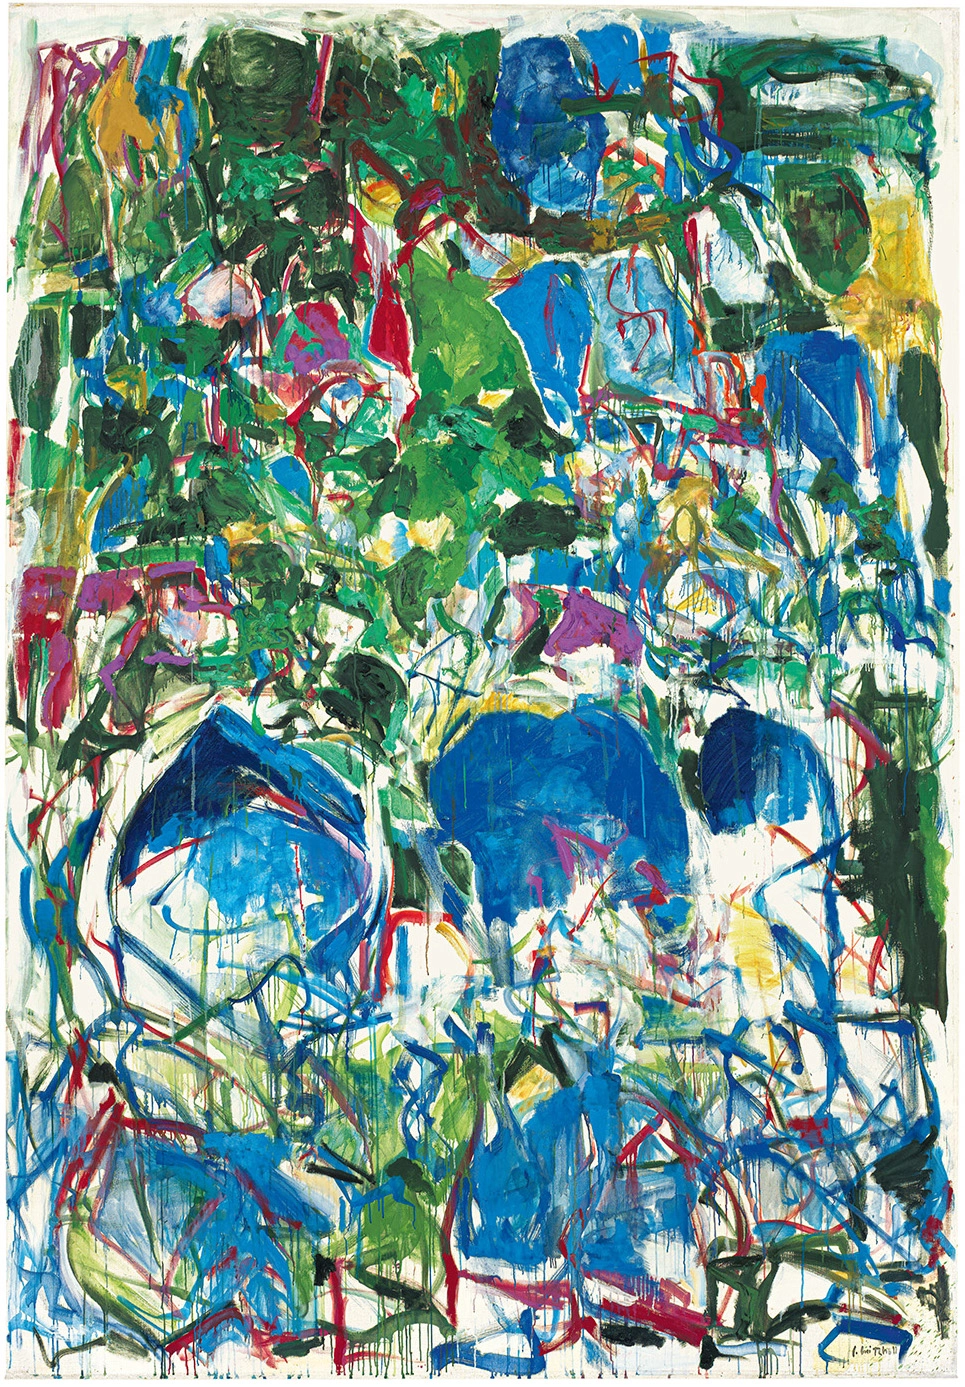 Joan Mitchell, My Landscape II (1967). Collection of the Smithsonian American Art Museum, Washington, D.C., gift of Mr. and Mrs. David K. Anderson, Martha Jackson Memorial Collection; ©estate of Joan Mitchell.